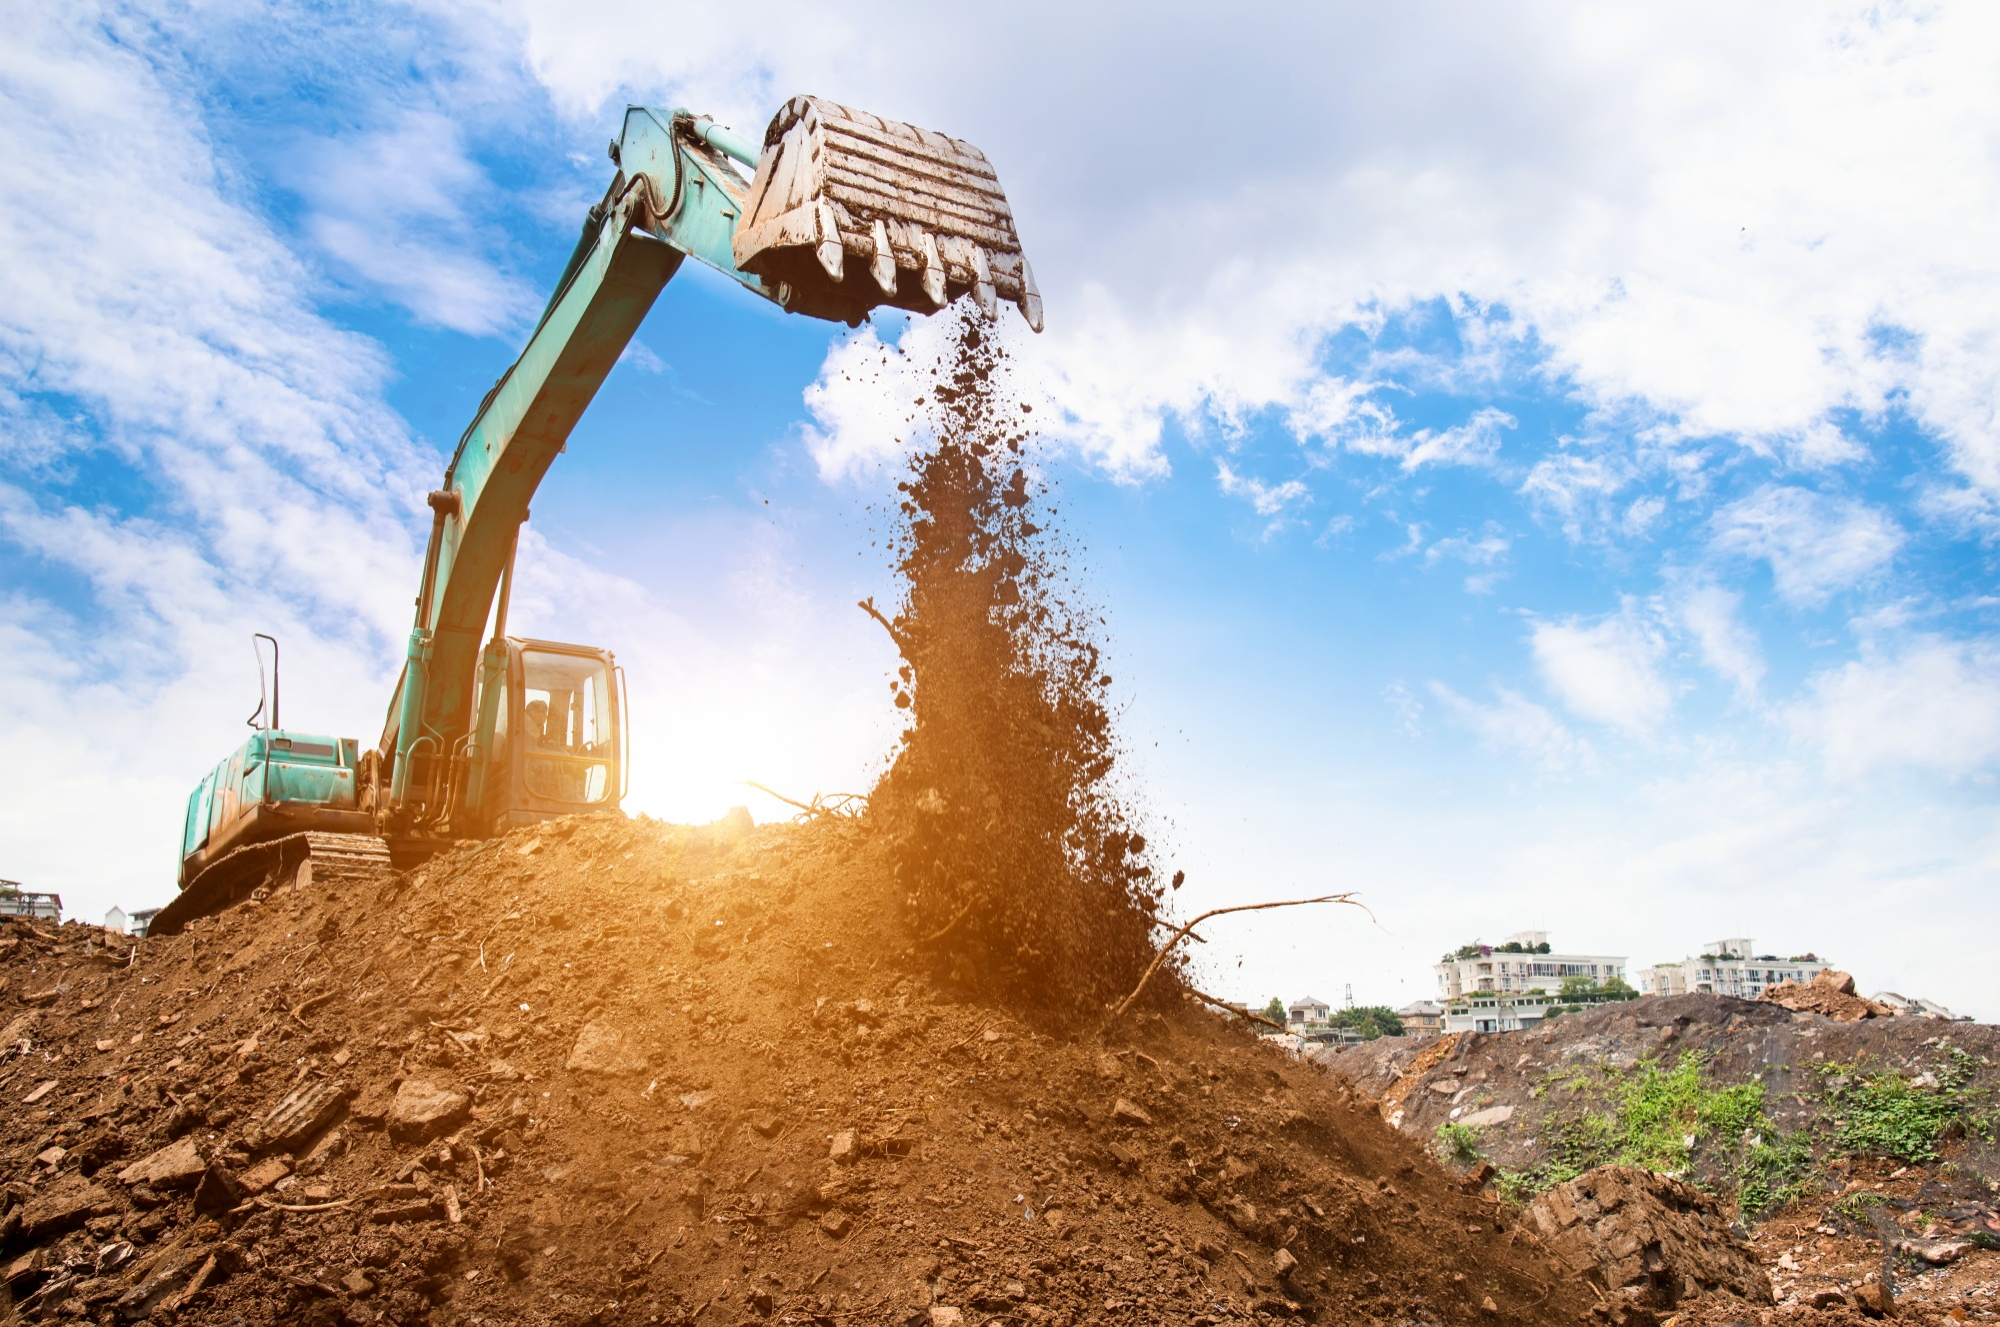 Farm Work Made Easy: Excavators, Compact Tracked Loaders, and Final Drive Motors